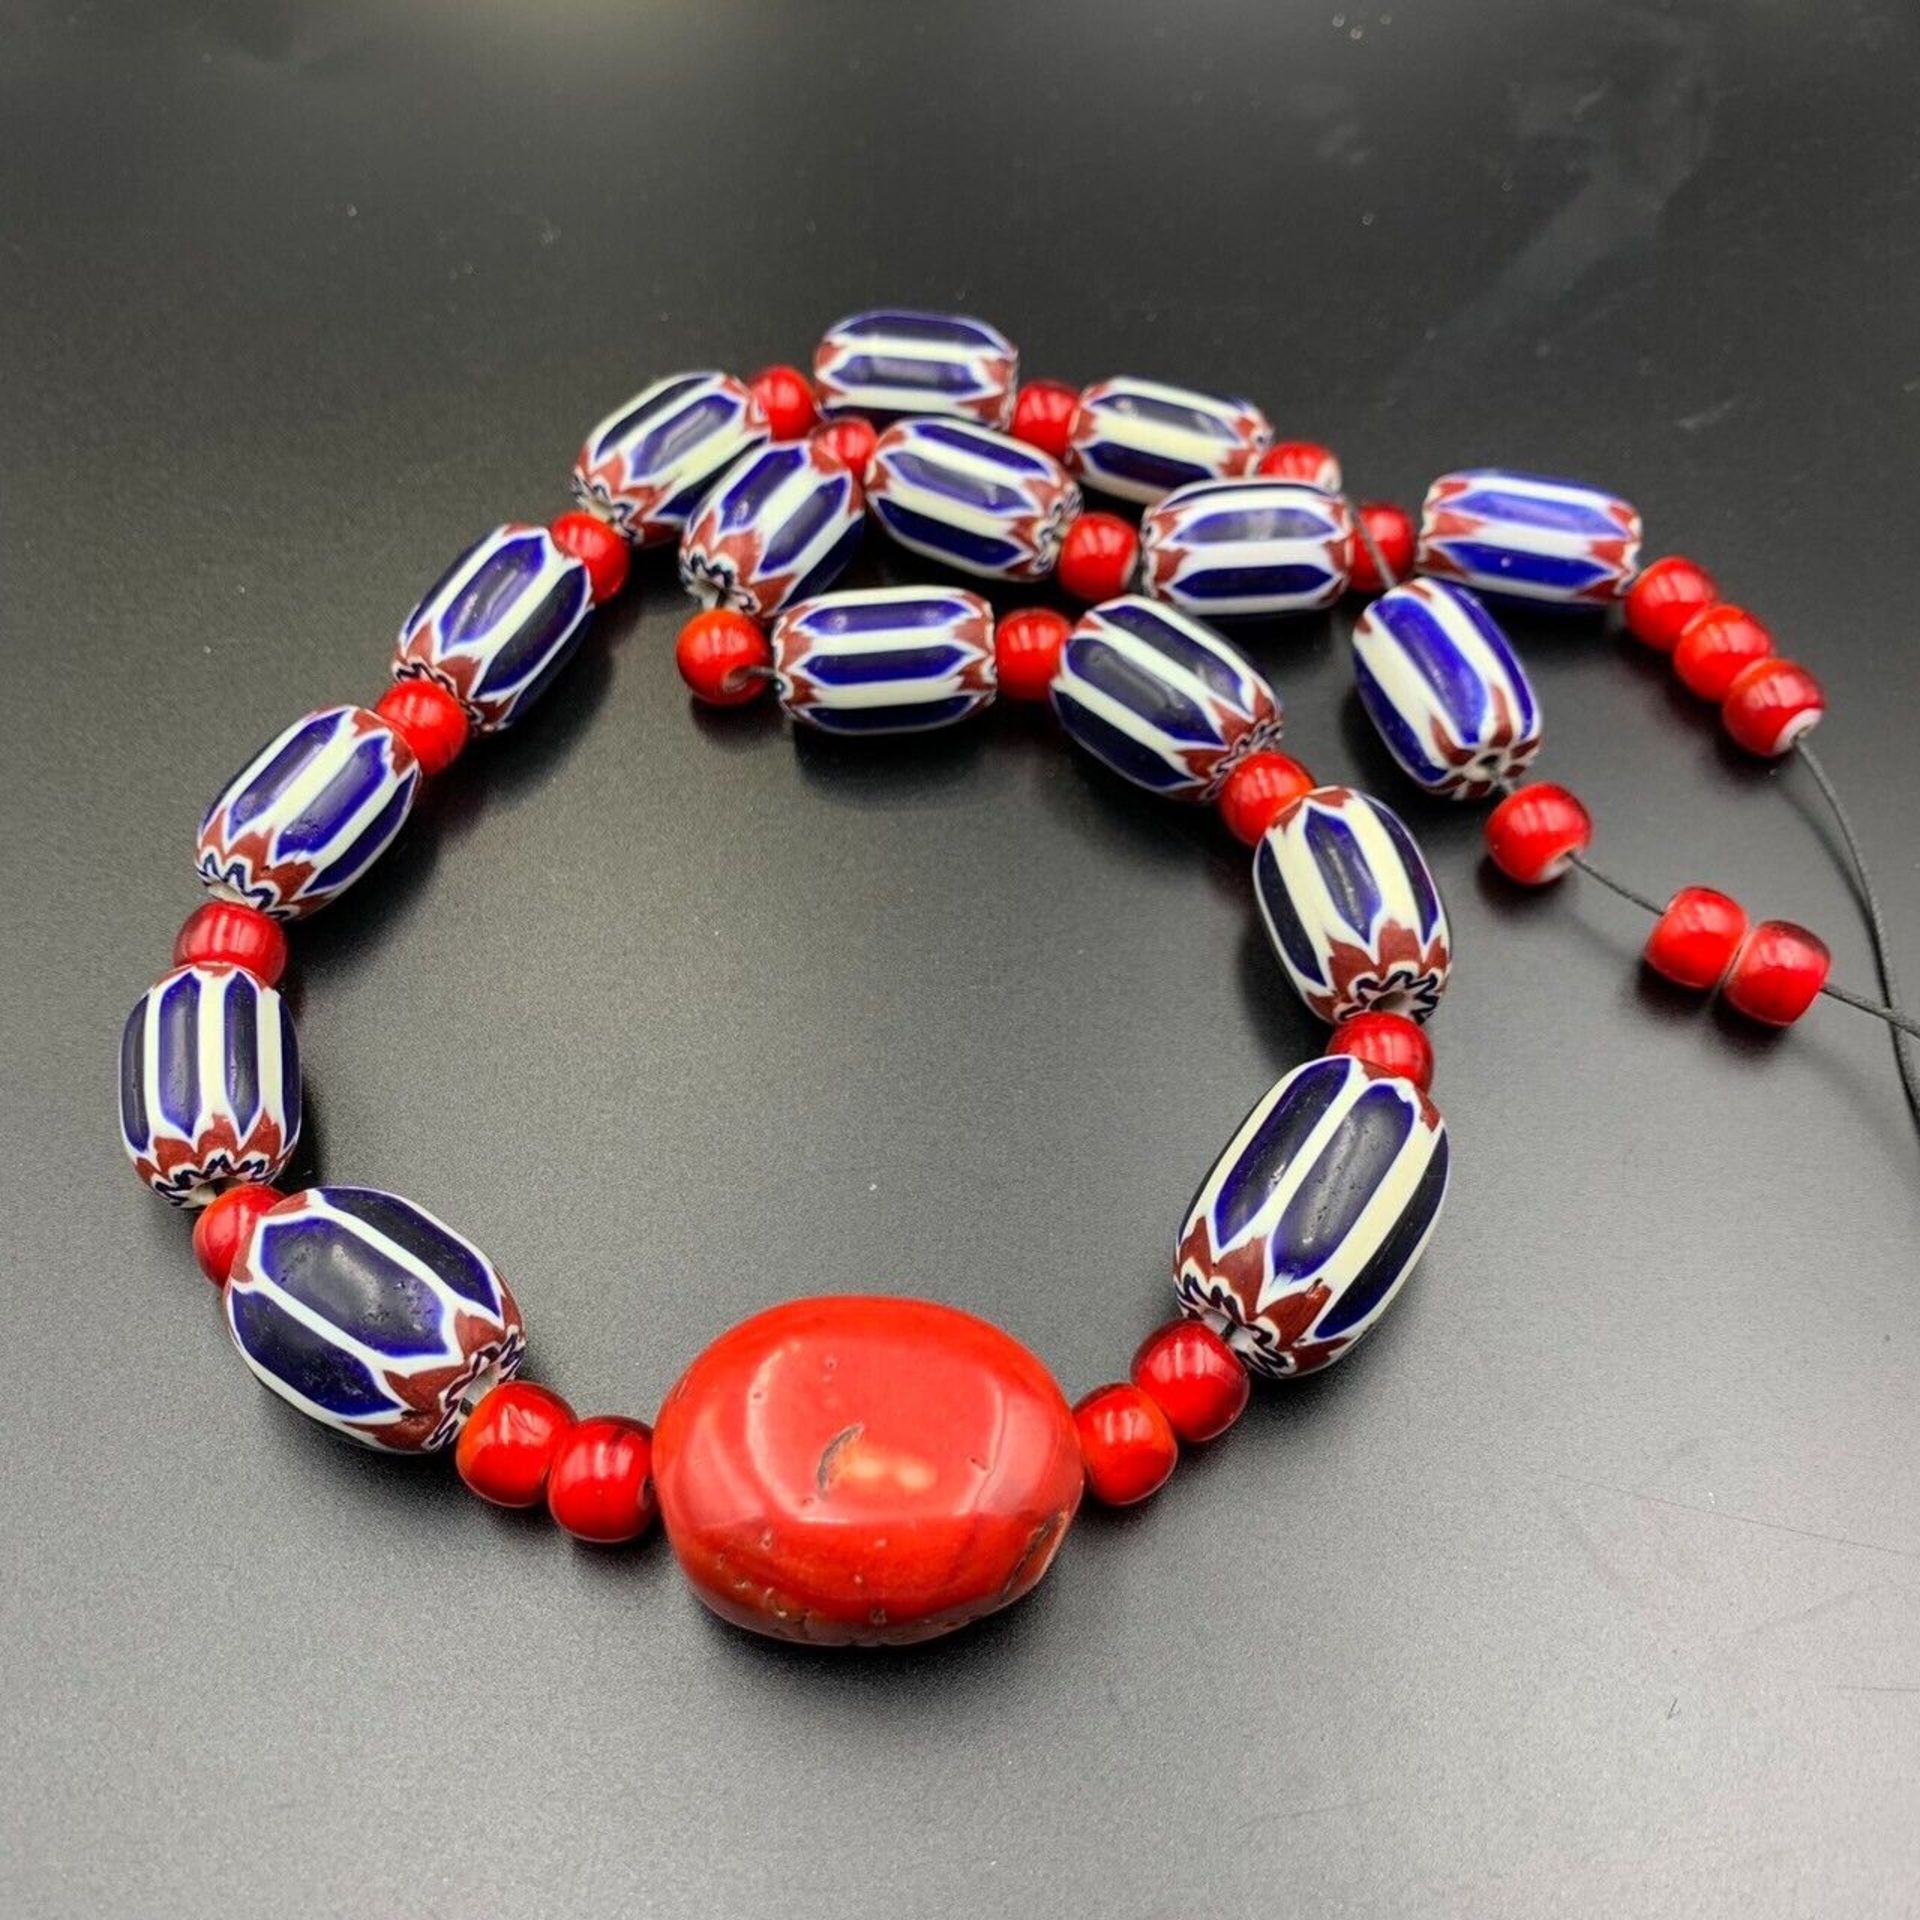 Vintage Chevron Trade Glass Beads, White Heart Beads With Big Coral Bead Strand - Image 3 of 4